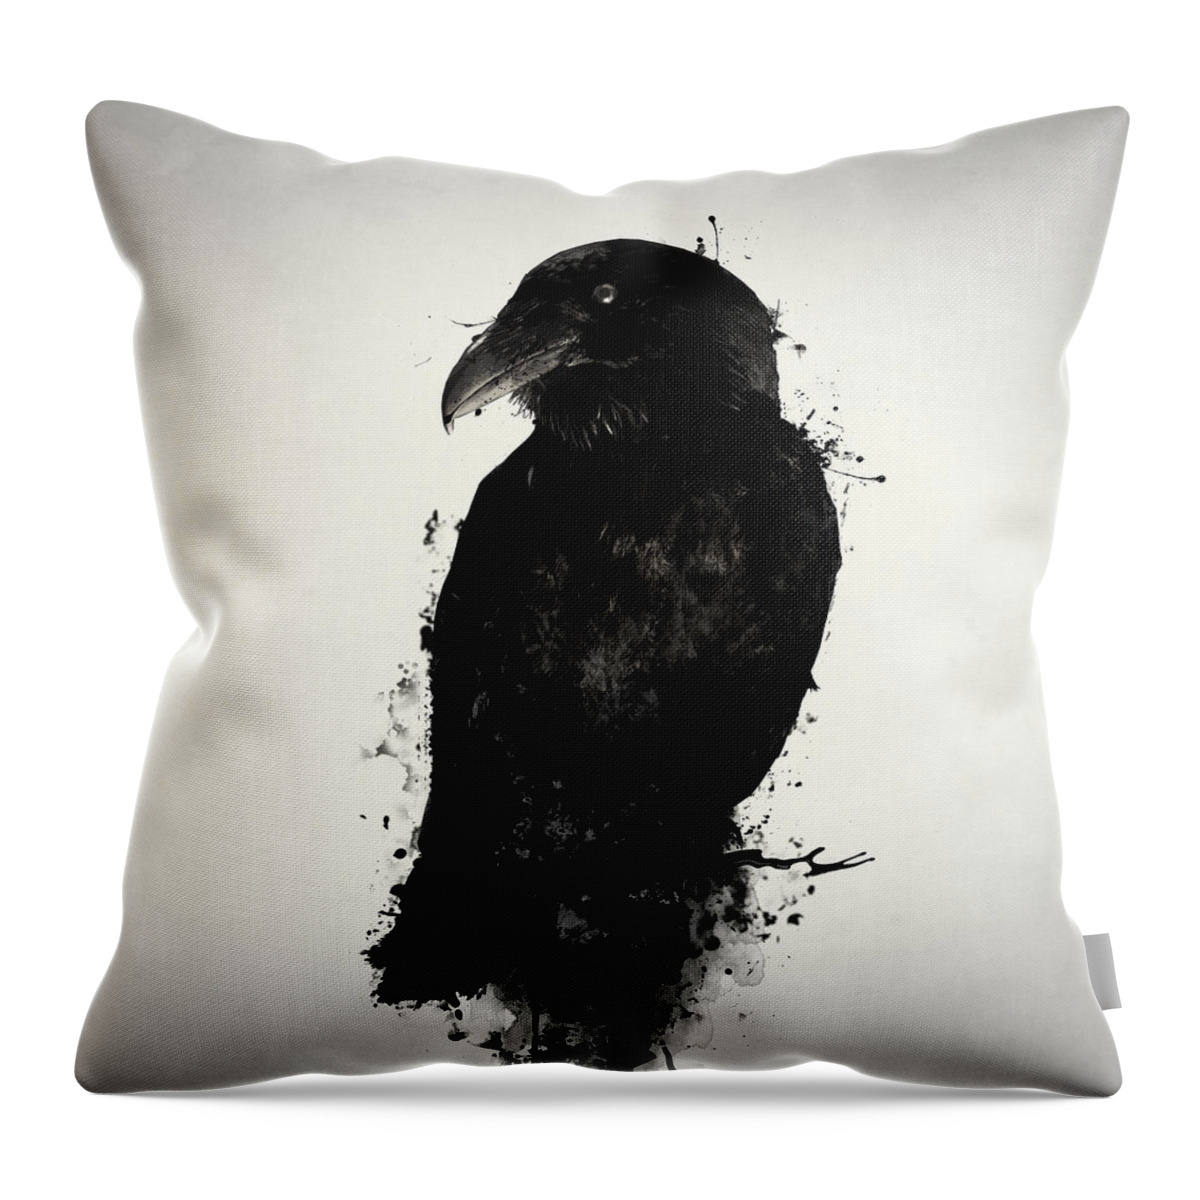 Raven Throw Pillow featuring the mixed media The Raven by Nicklas Gustafsson